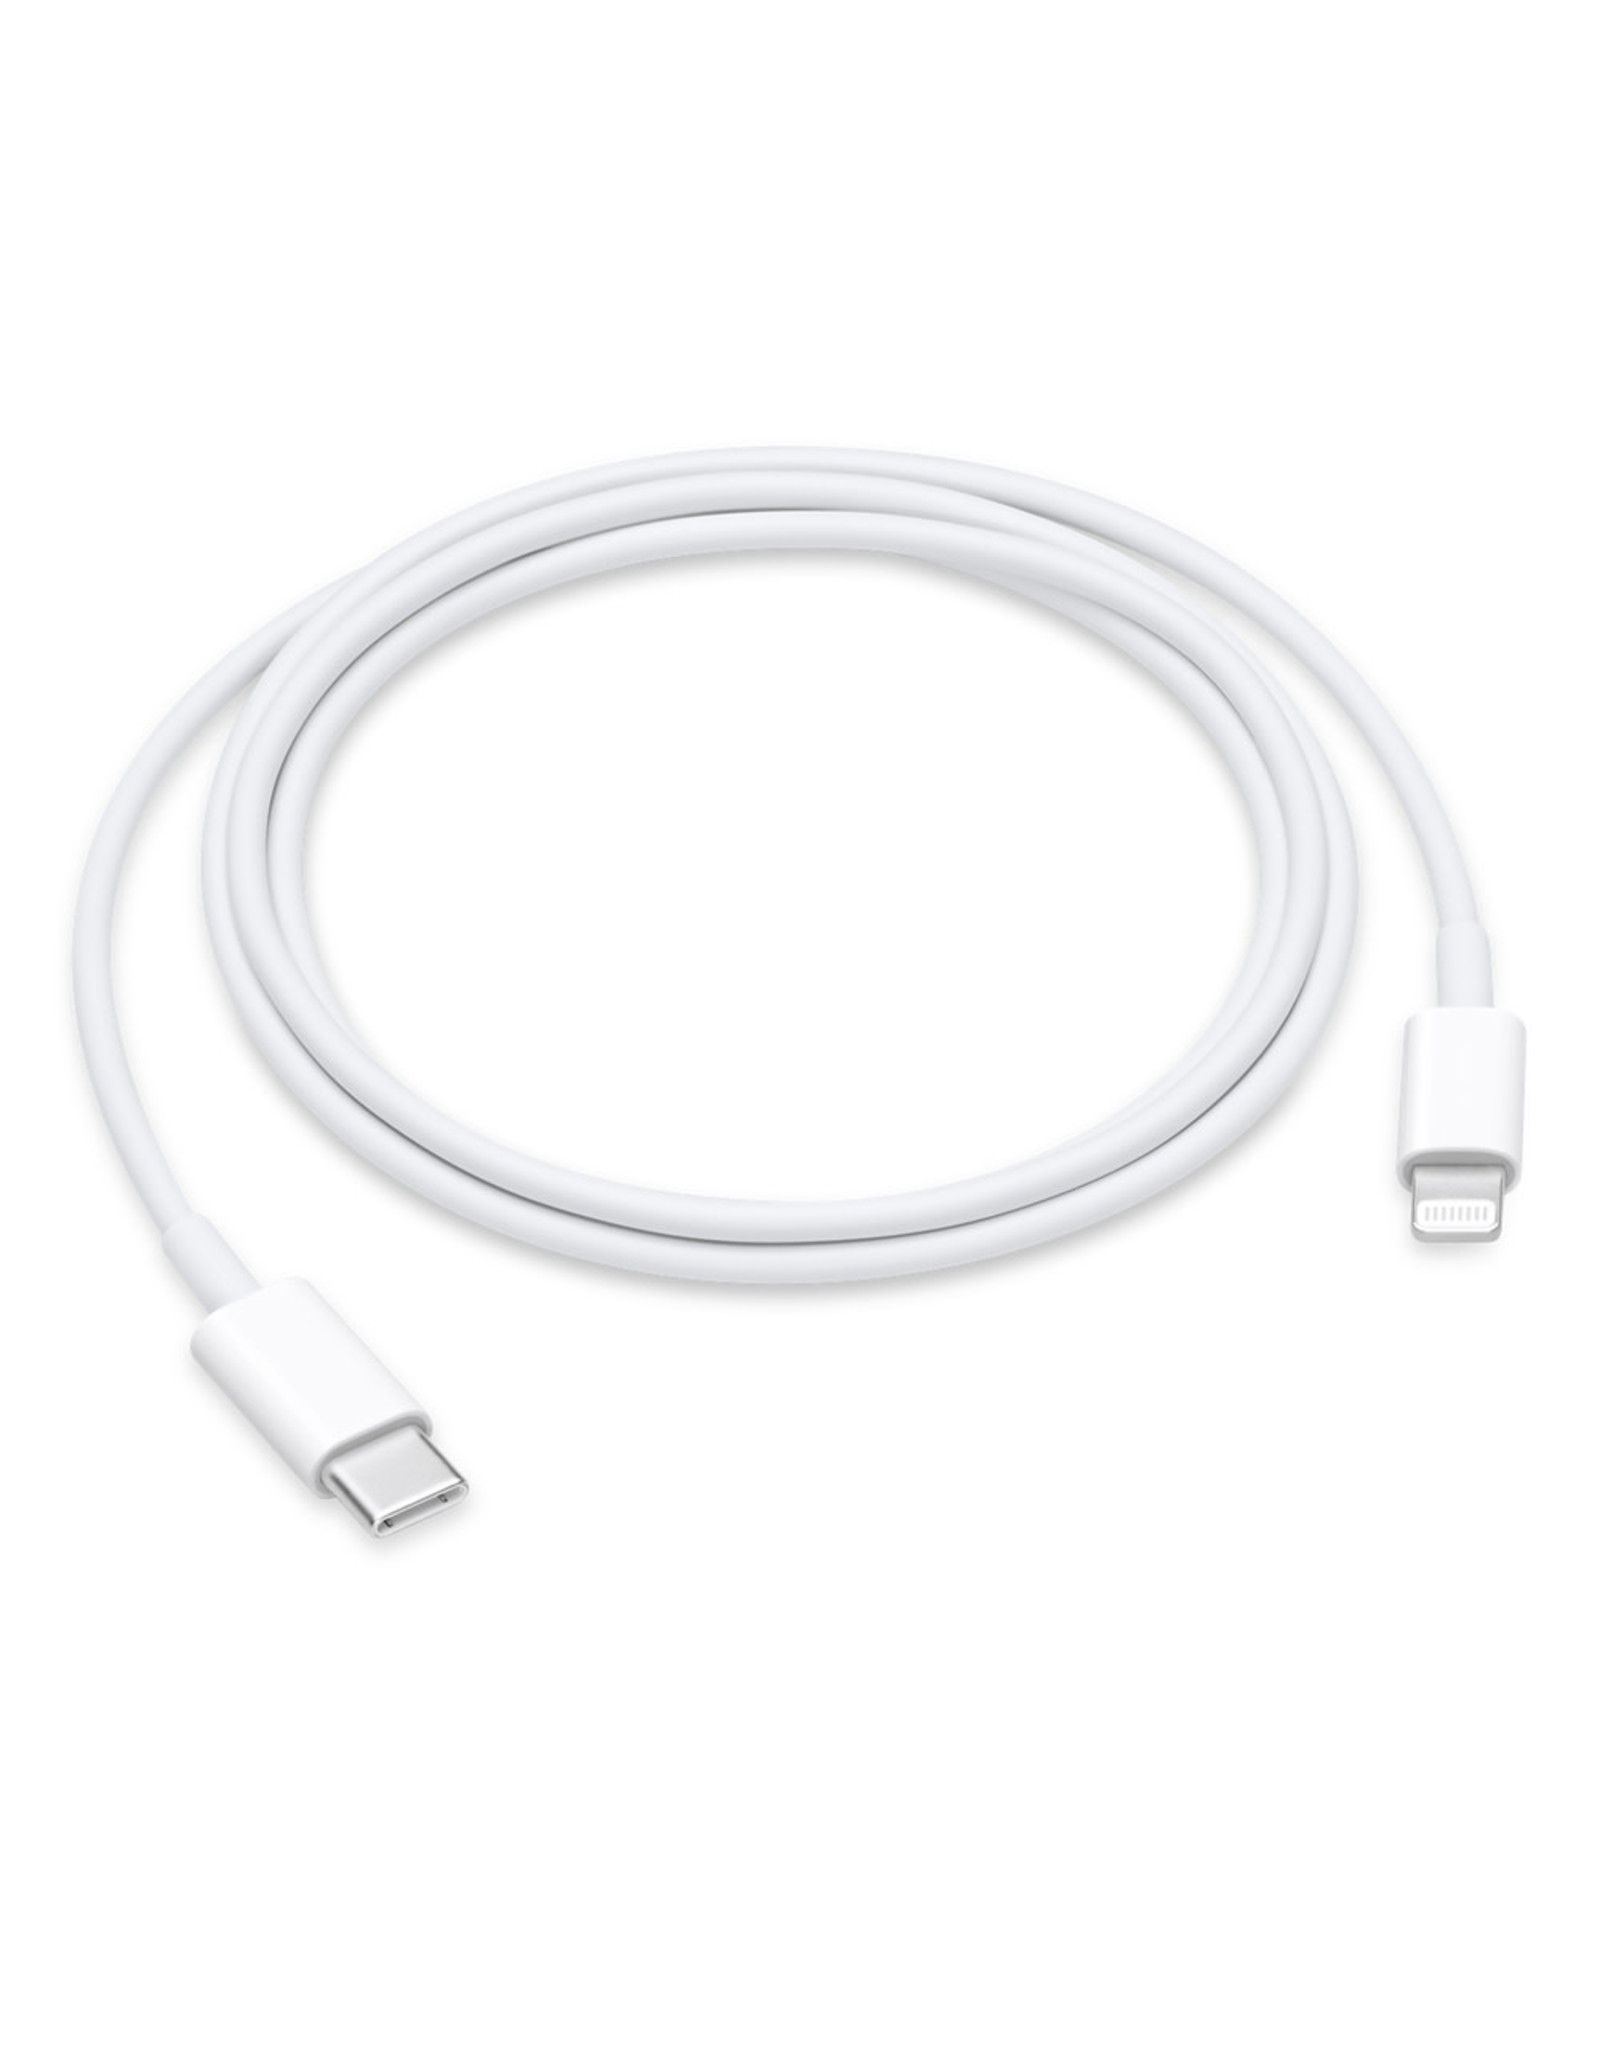 APPLE USB-C CABLE TO LIGHTNING  (1 M)